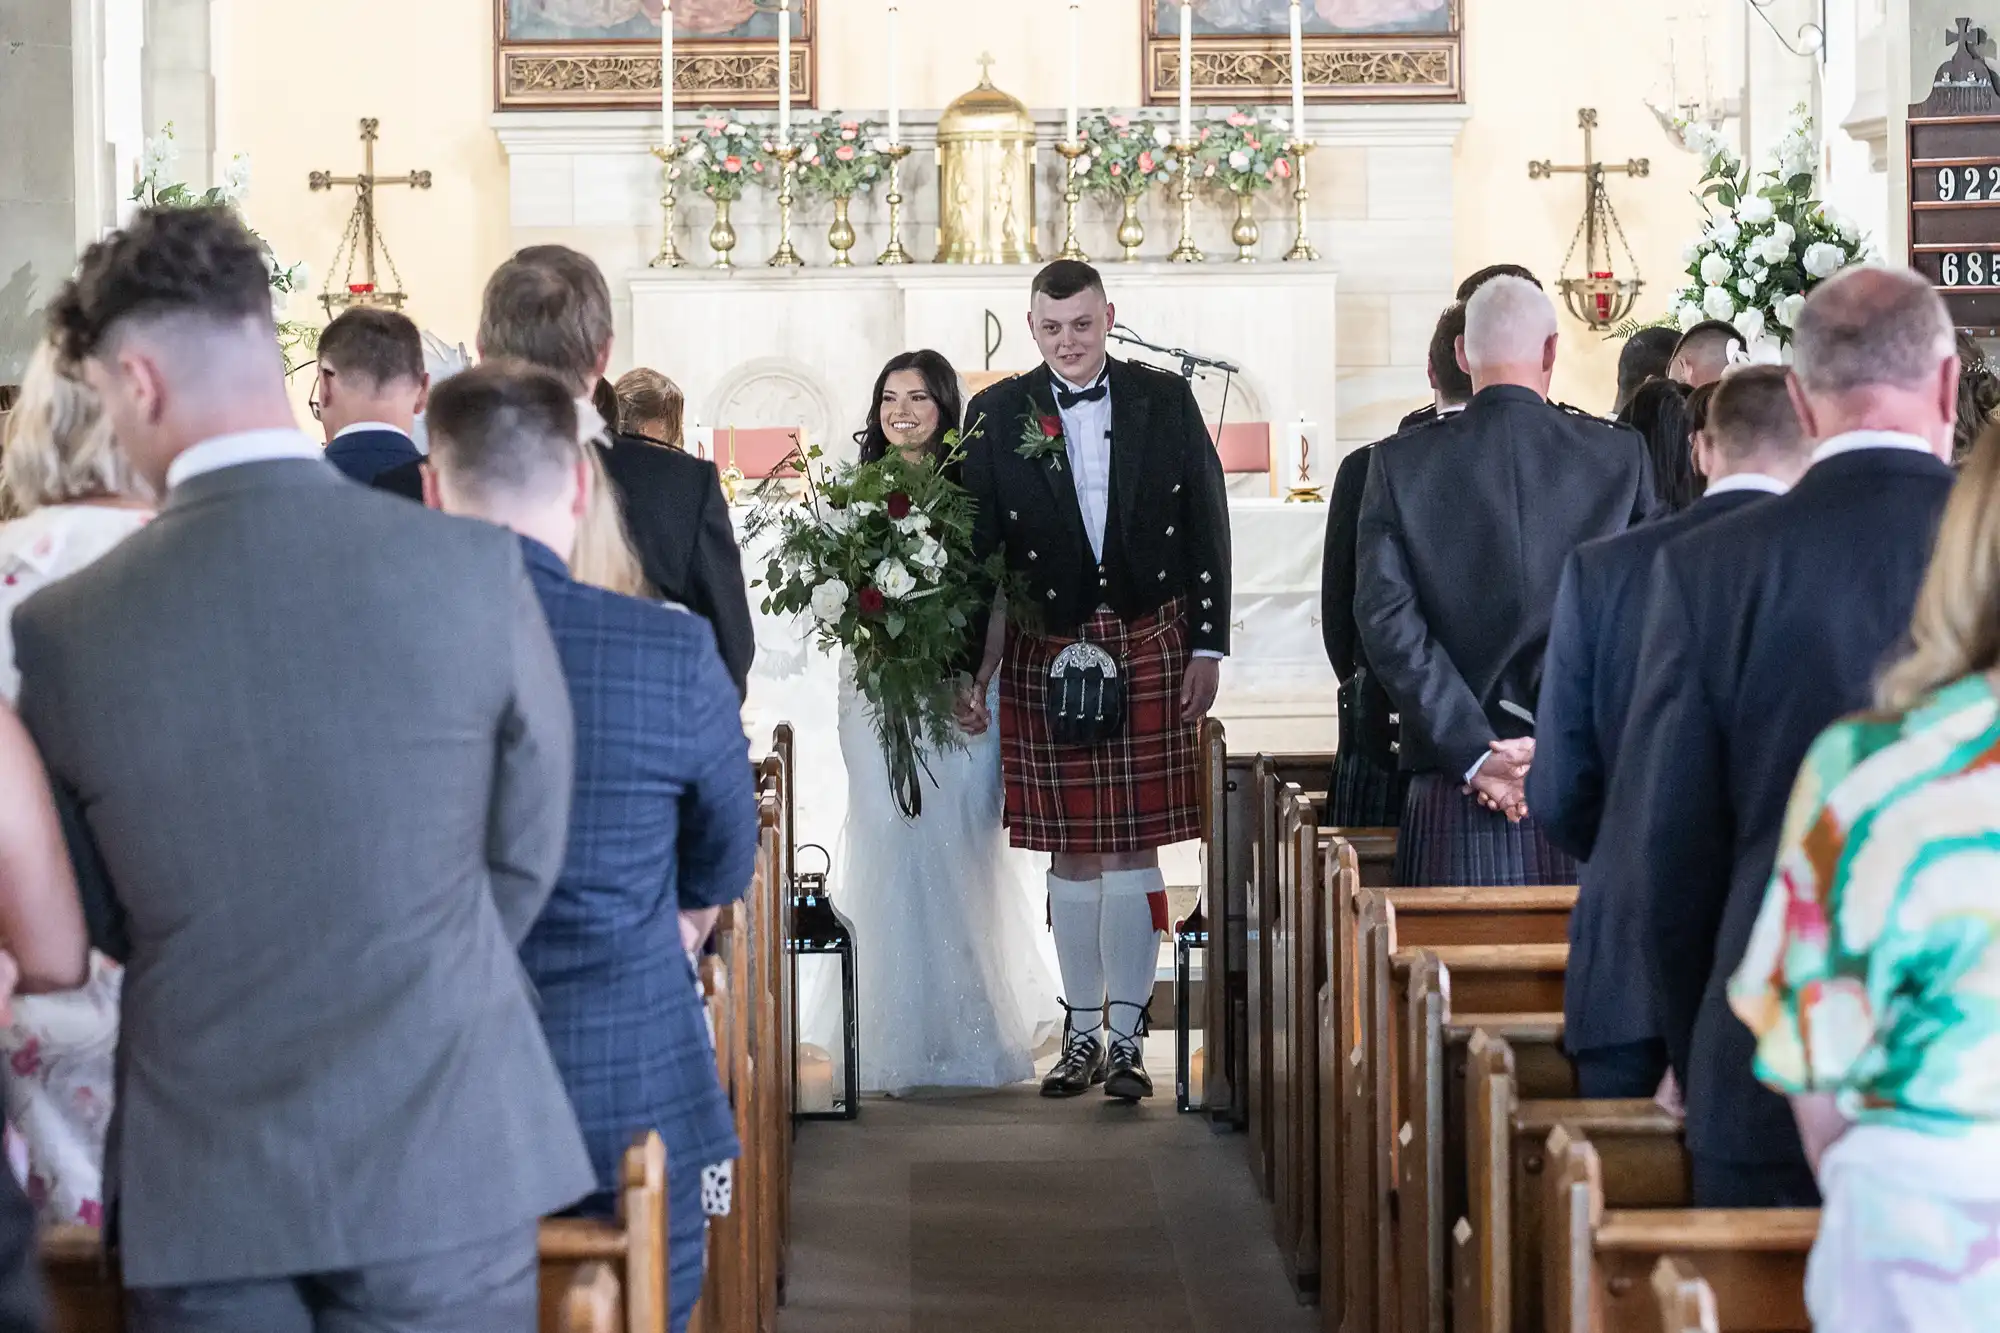 Bride and groom smiling as they walk down the aisle in a church, surrounded by guests; groom is wearing a traditional kilt.